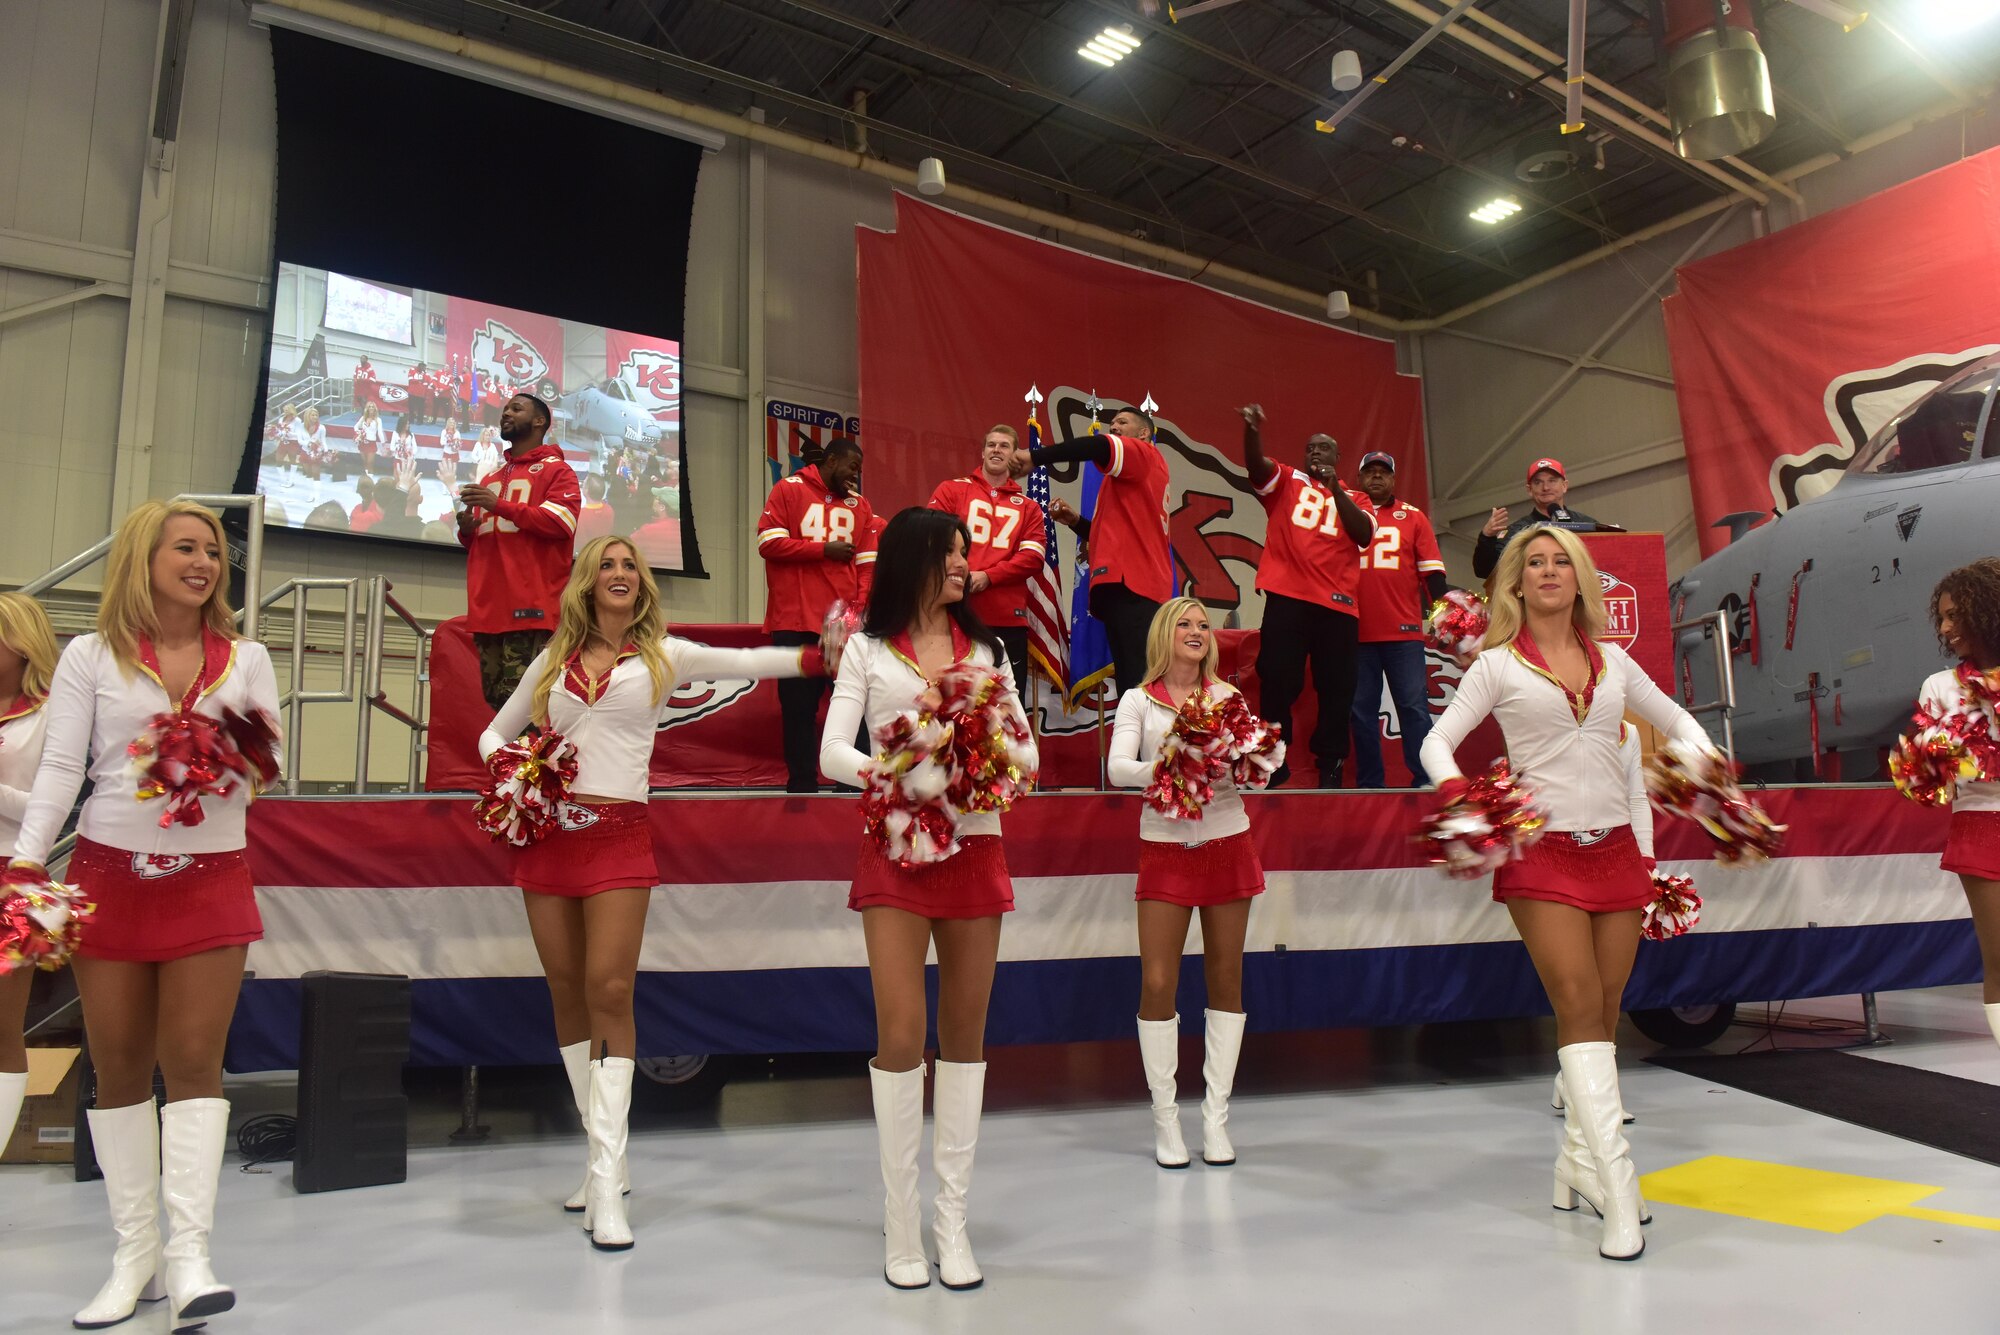 Members of Team Whiteman met current Kansas City Chiefs players, ambassadors, cheerleaders, and the mascot, KC Wolf, during the 2017 Draft Day event at Whiteman Air Force Base, Mo., April 29, 2017. From setting up the festivities in 5 Bay and Hangar 52 to providing security and medical readiness, more than 100 volunteers ensured the event was a success.